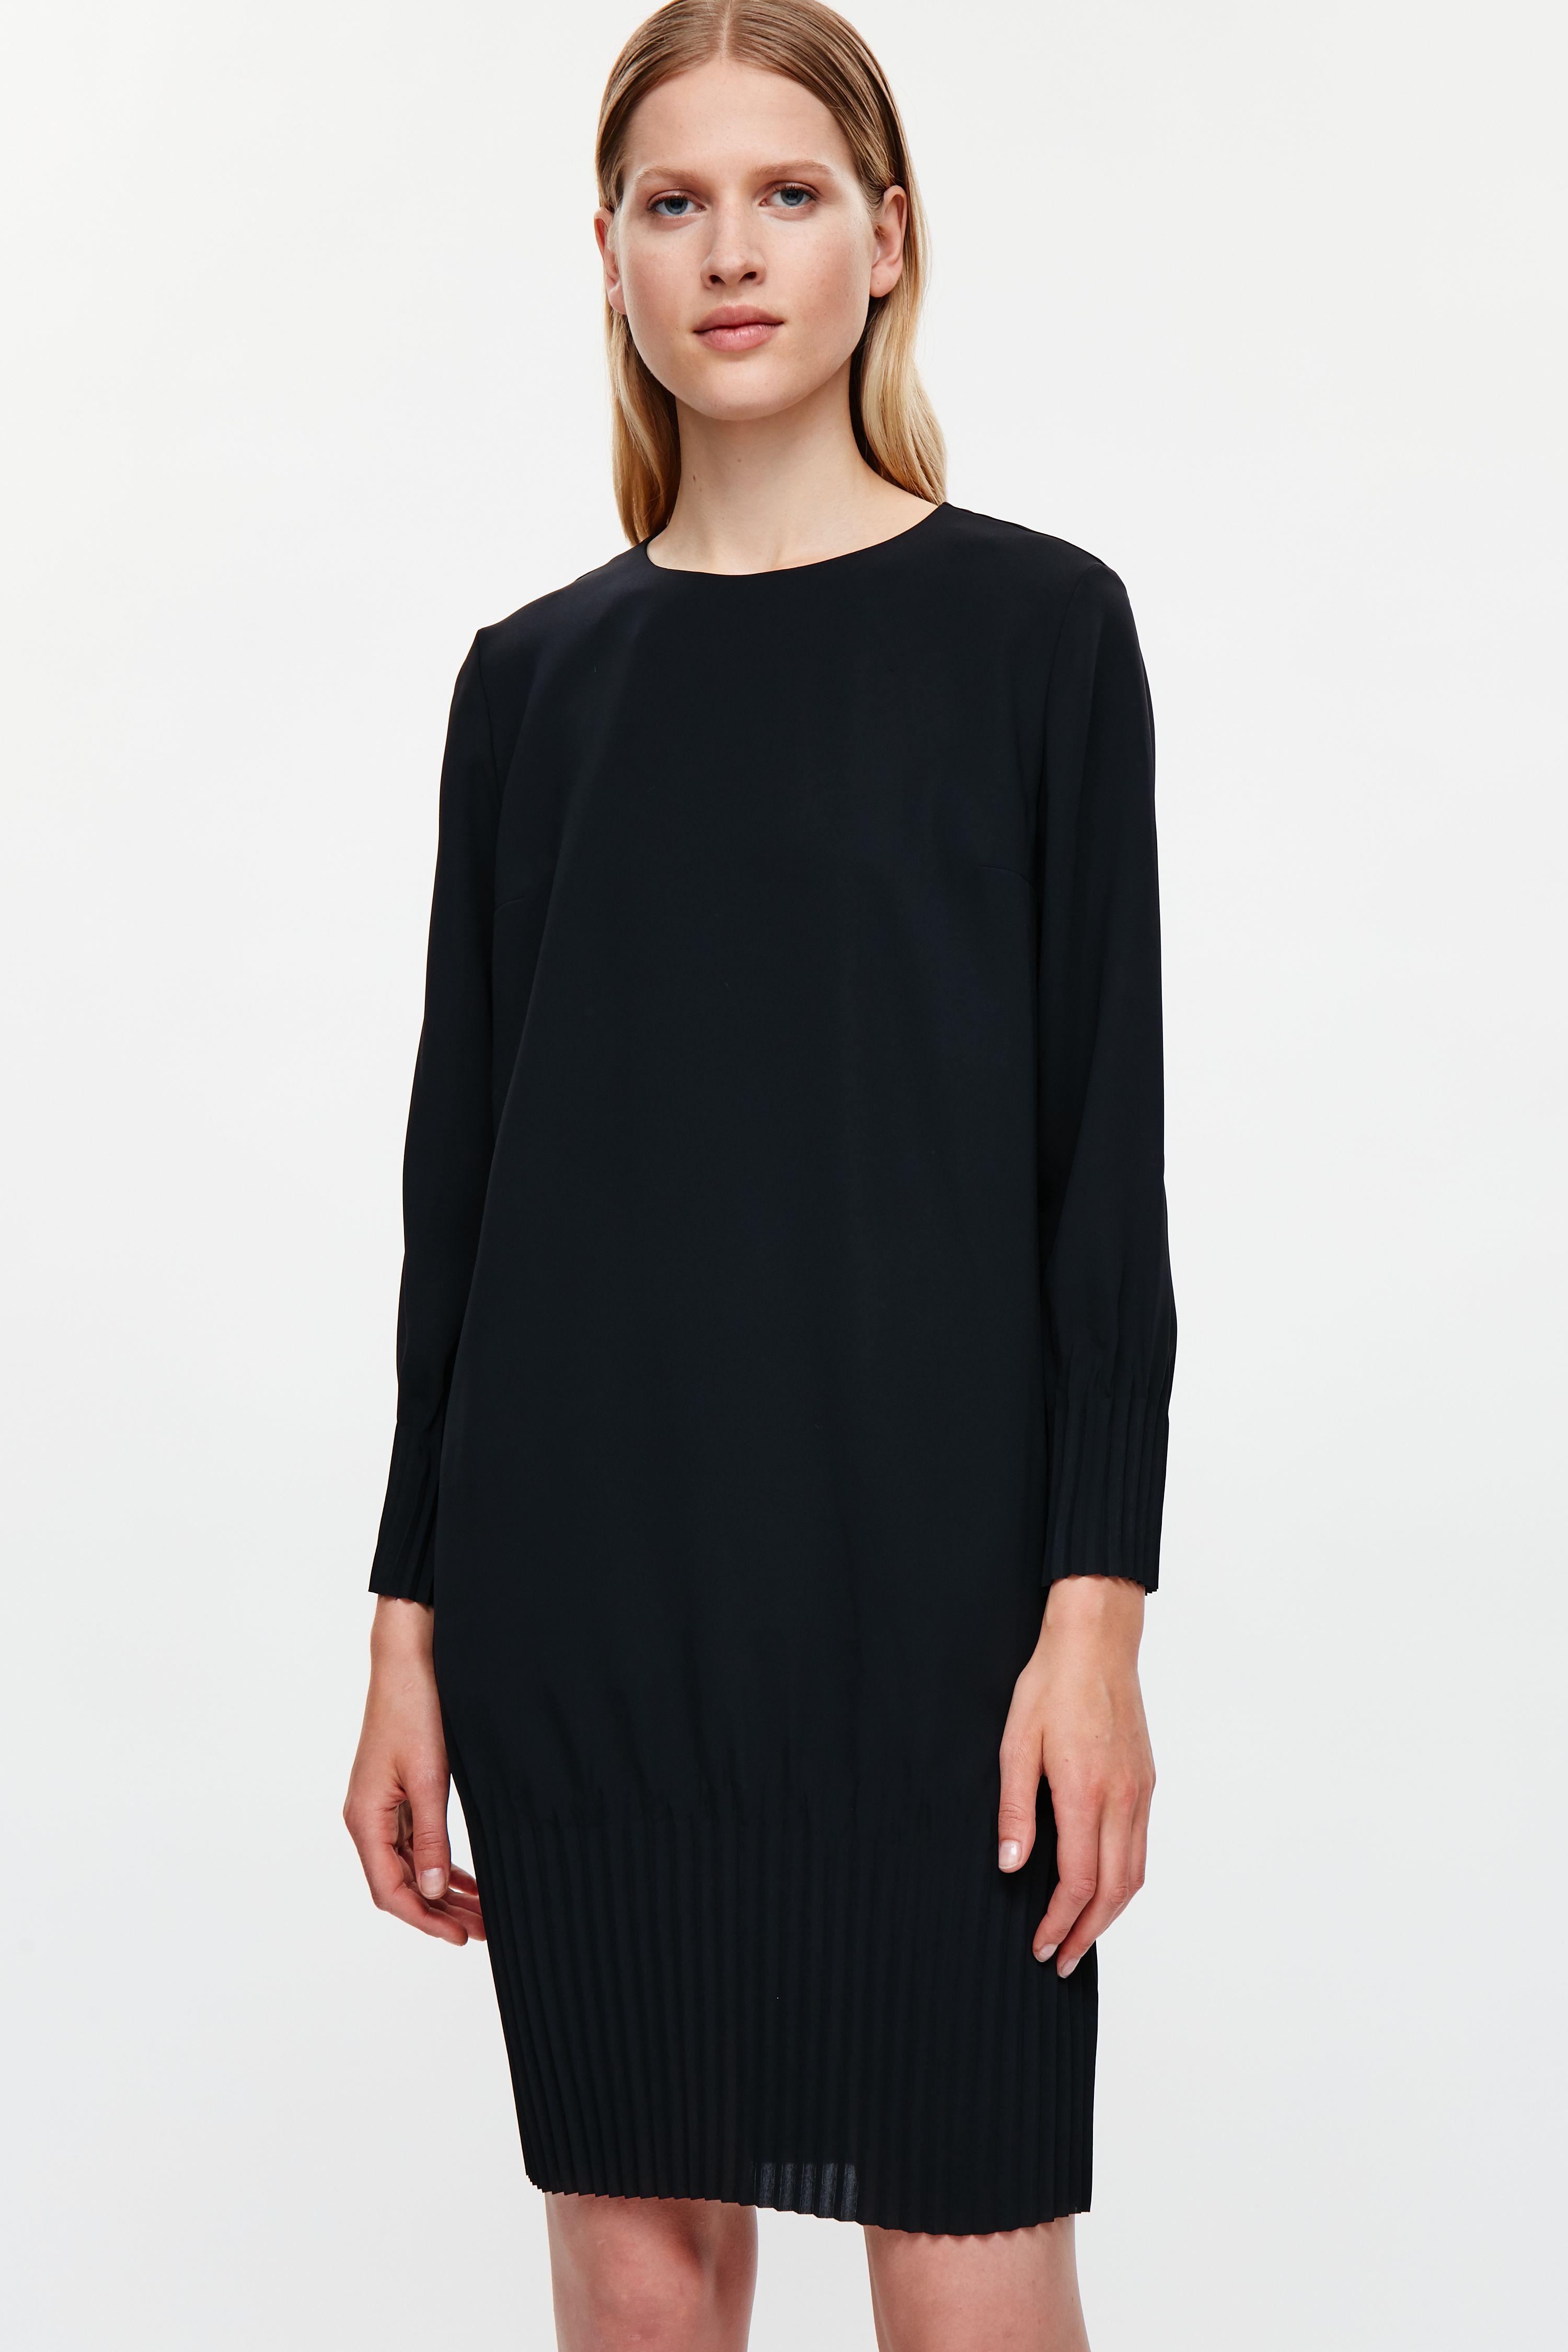 COS Synthetic Dress With Pleated Hems in Black - Lyst